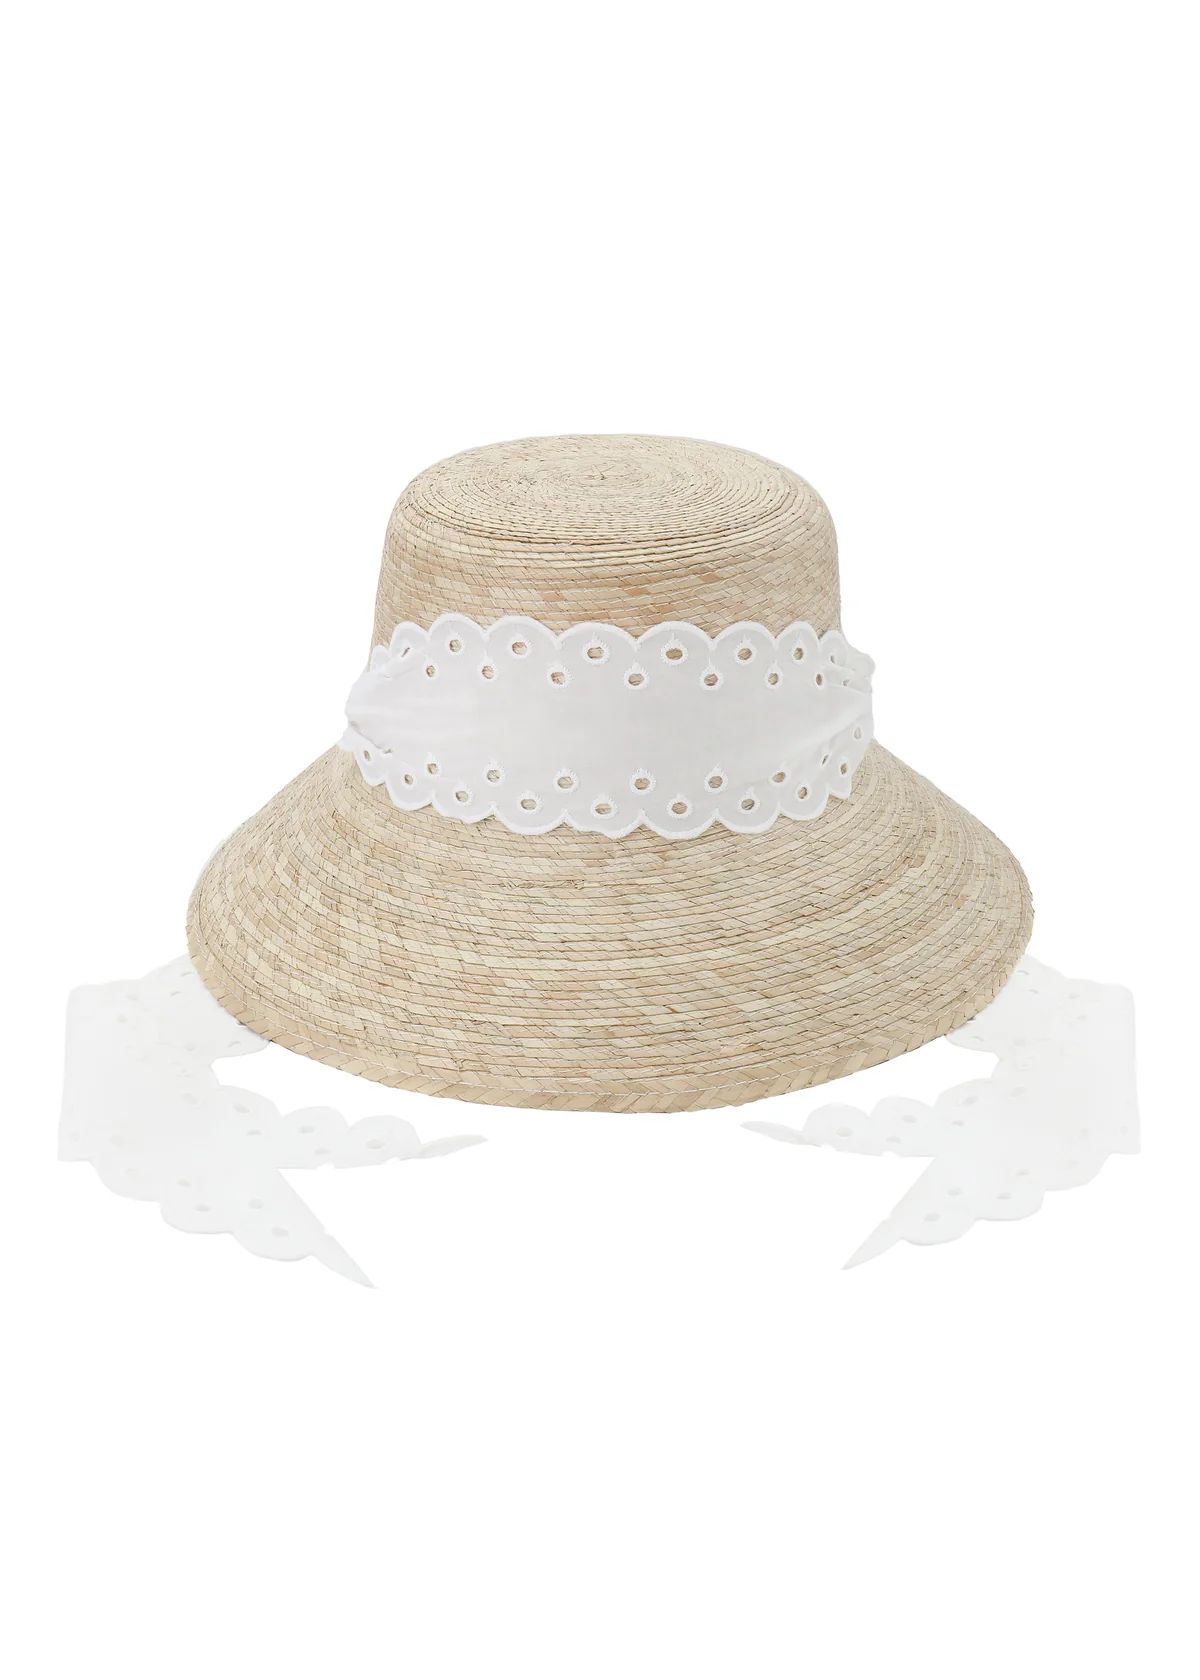 Clematis Bucket Hat With Antique Eyelet Scalloped Lace Ribbon | Over The Moon